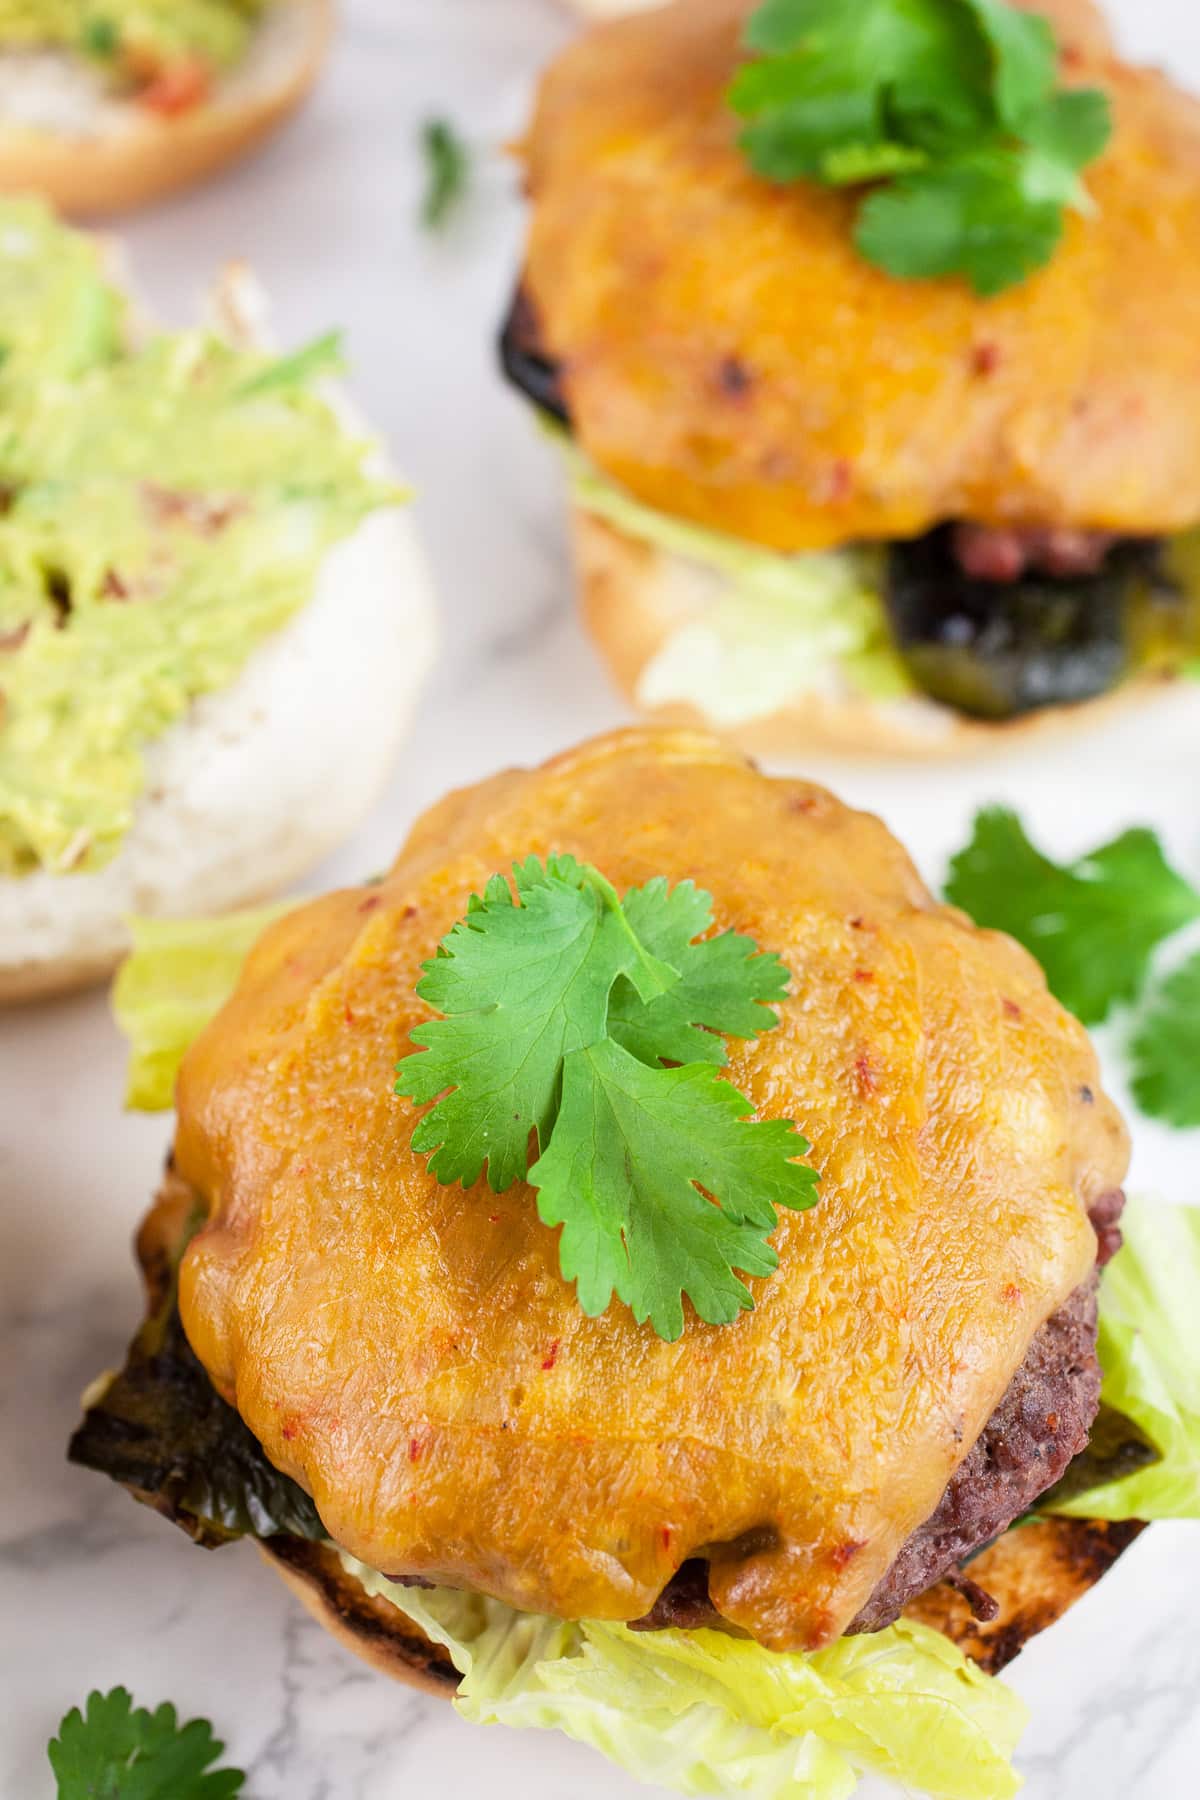 Southwest poblano burgers with melted cheese and cilantro.